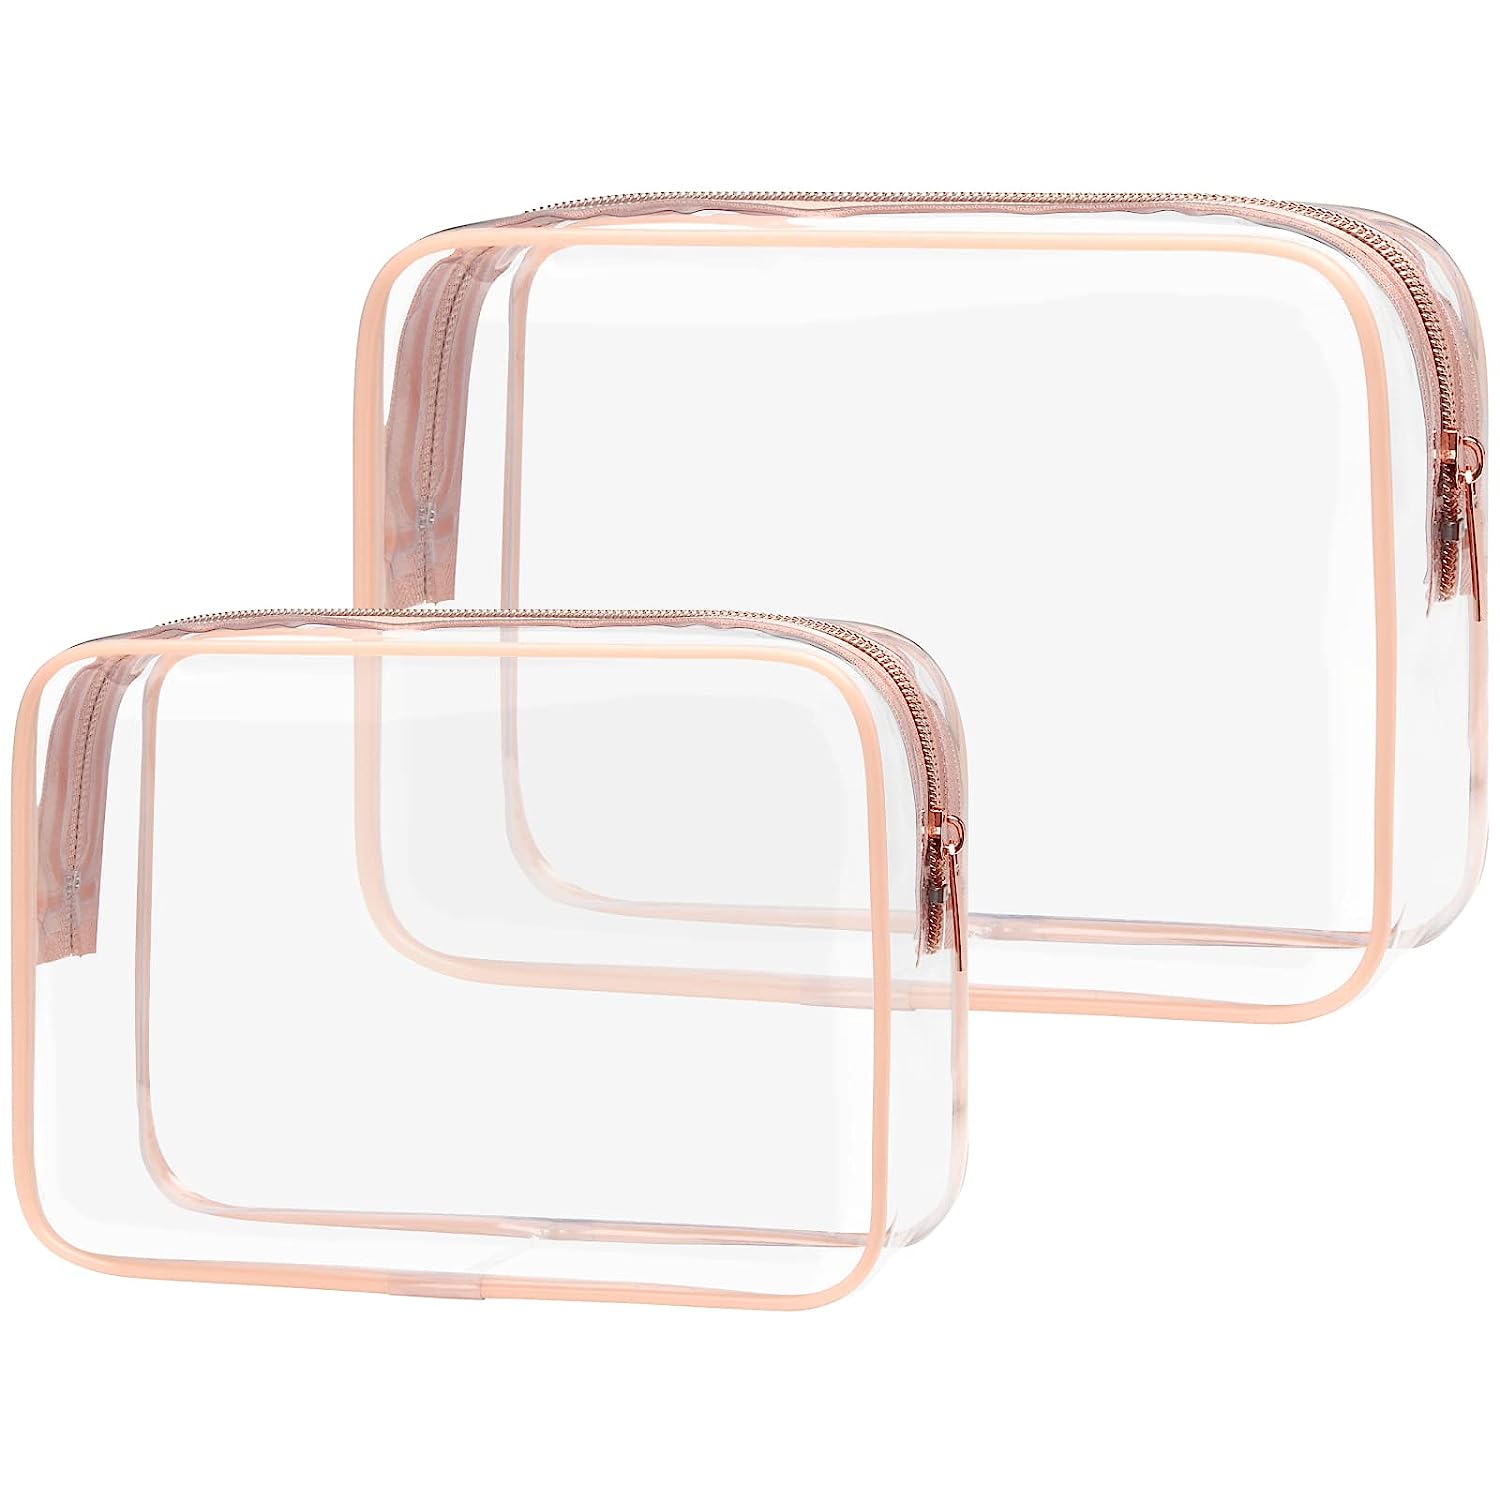 PACKISM Clear Makeup Bags 2 Pack Rose Pink.